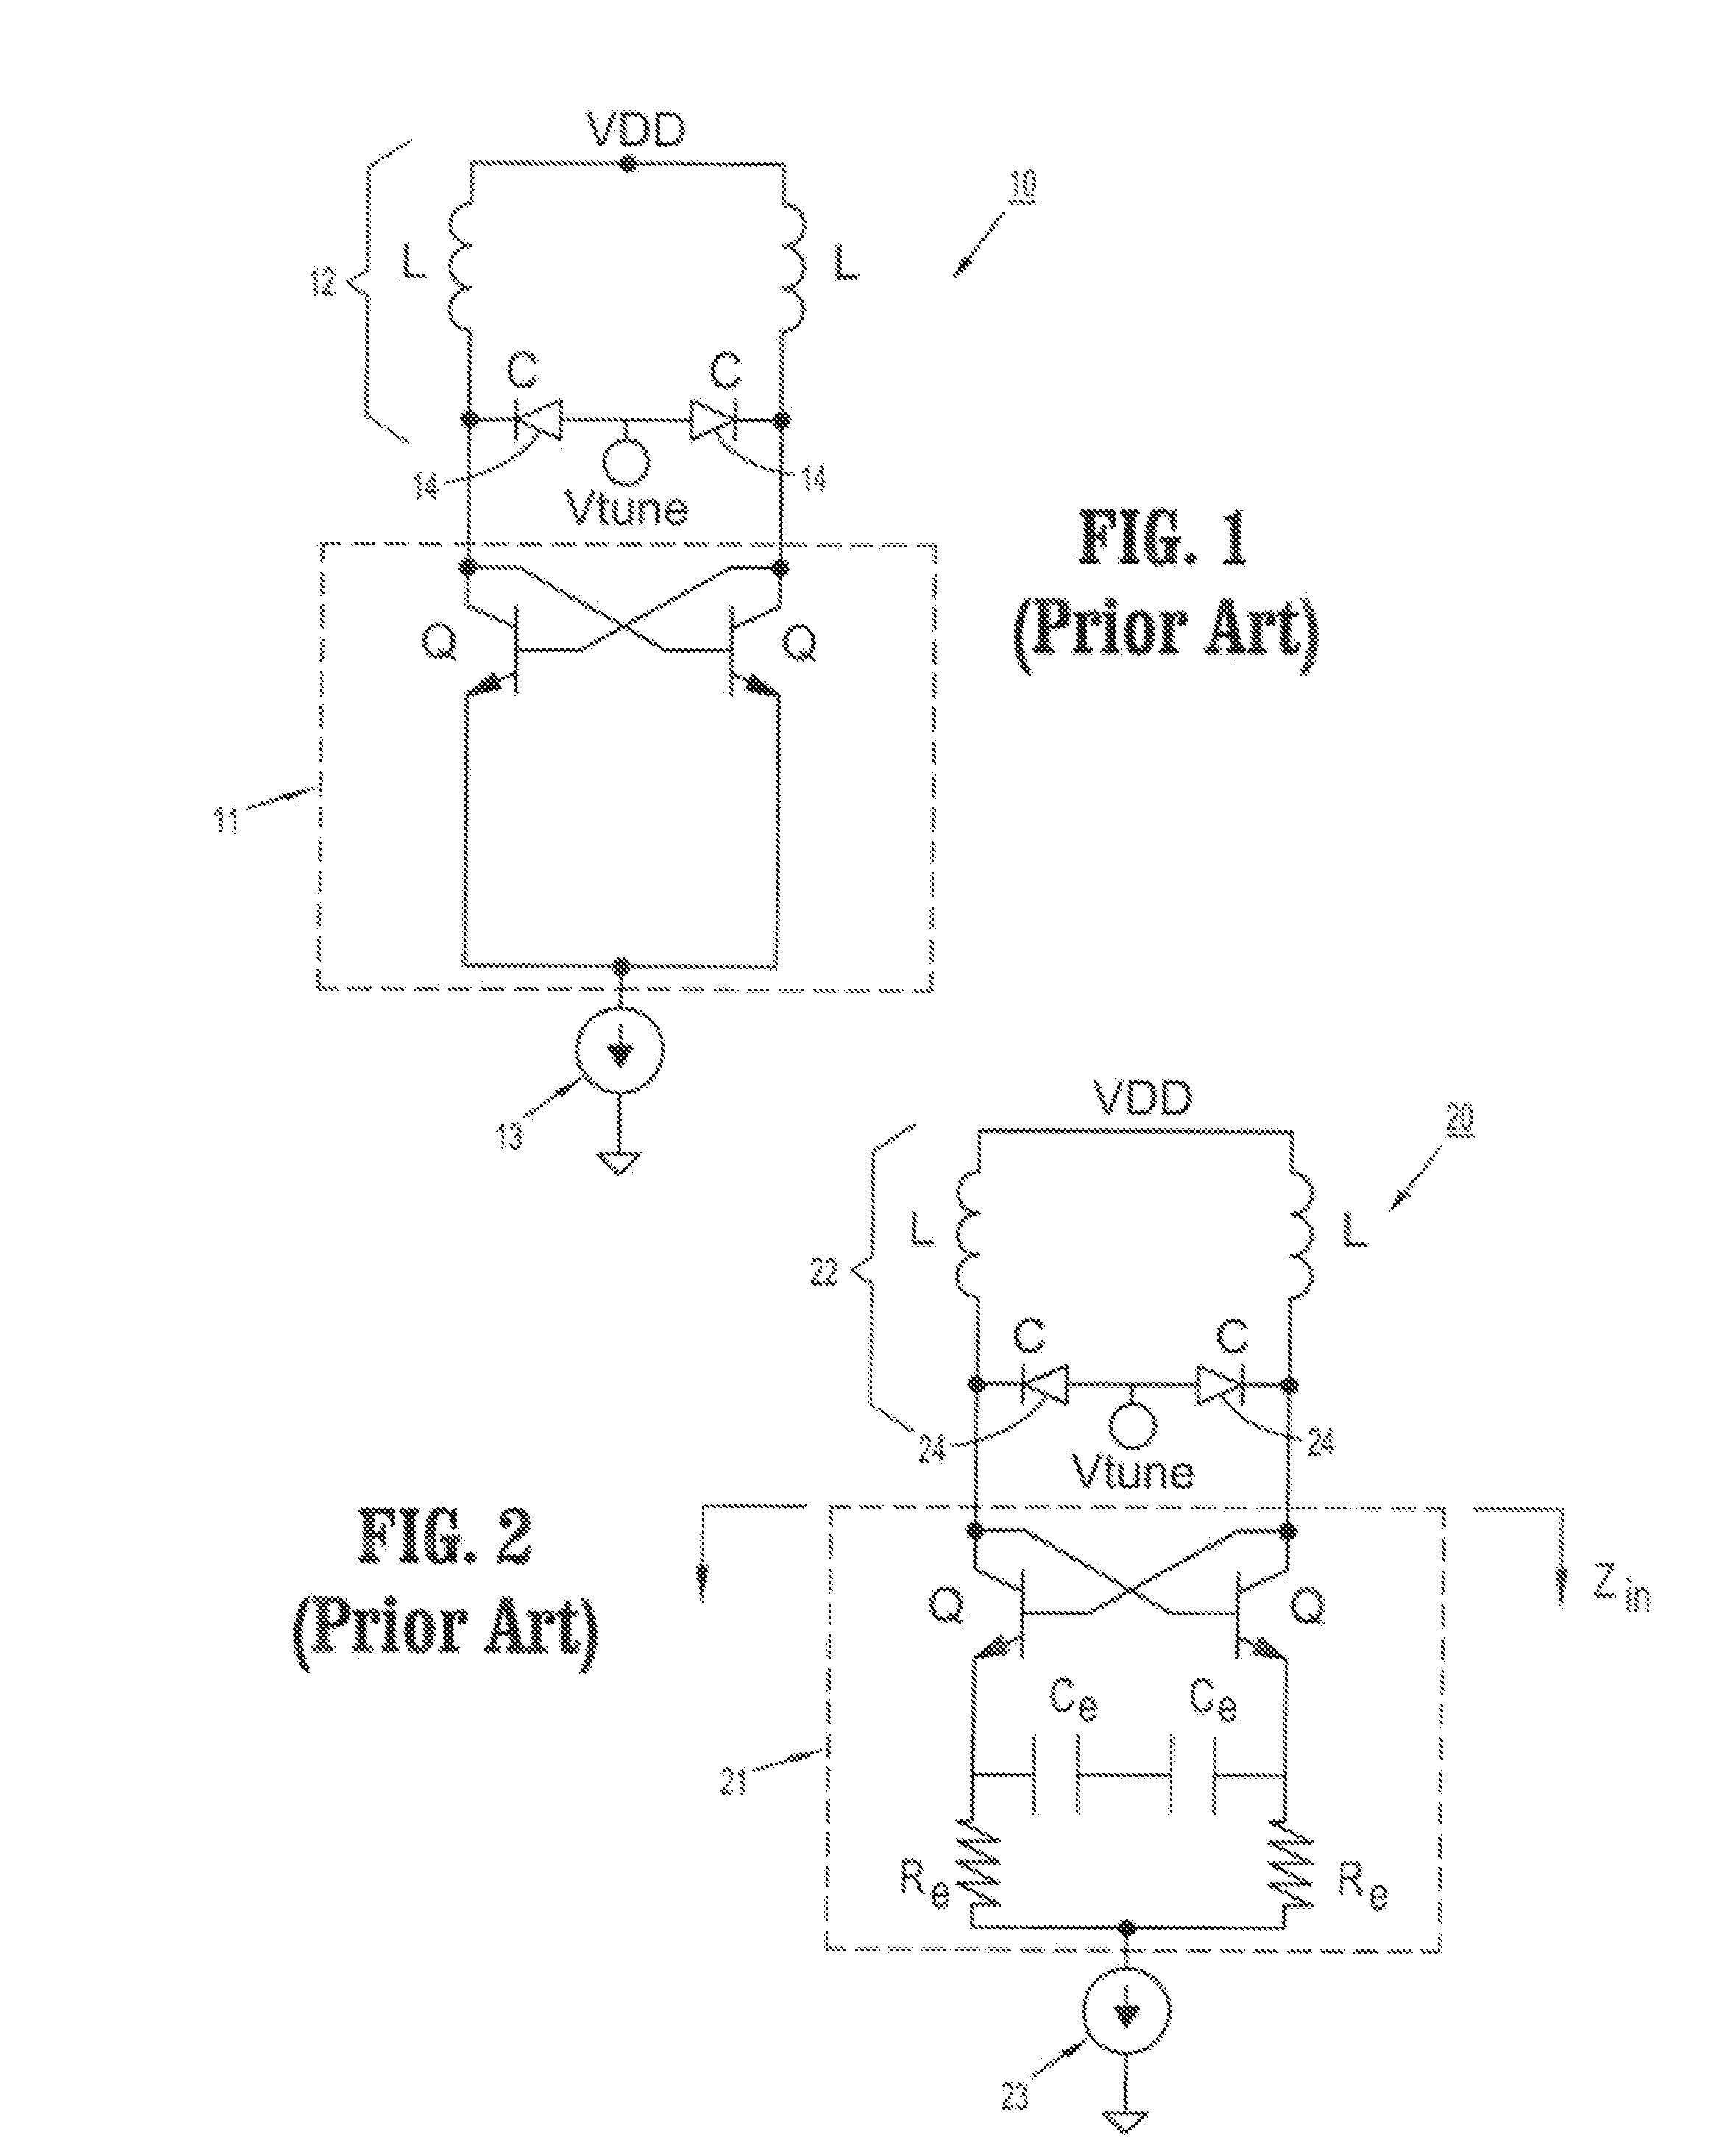 Voltage controlled oscillator circuits and methods using variable capacitance degeneration for increased tuning range